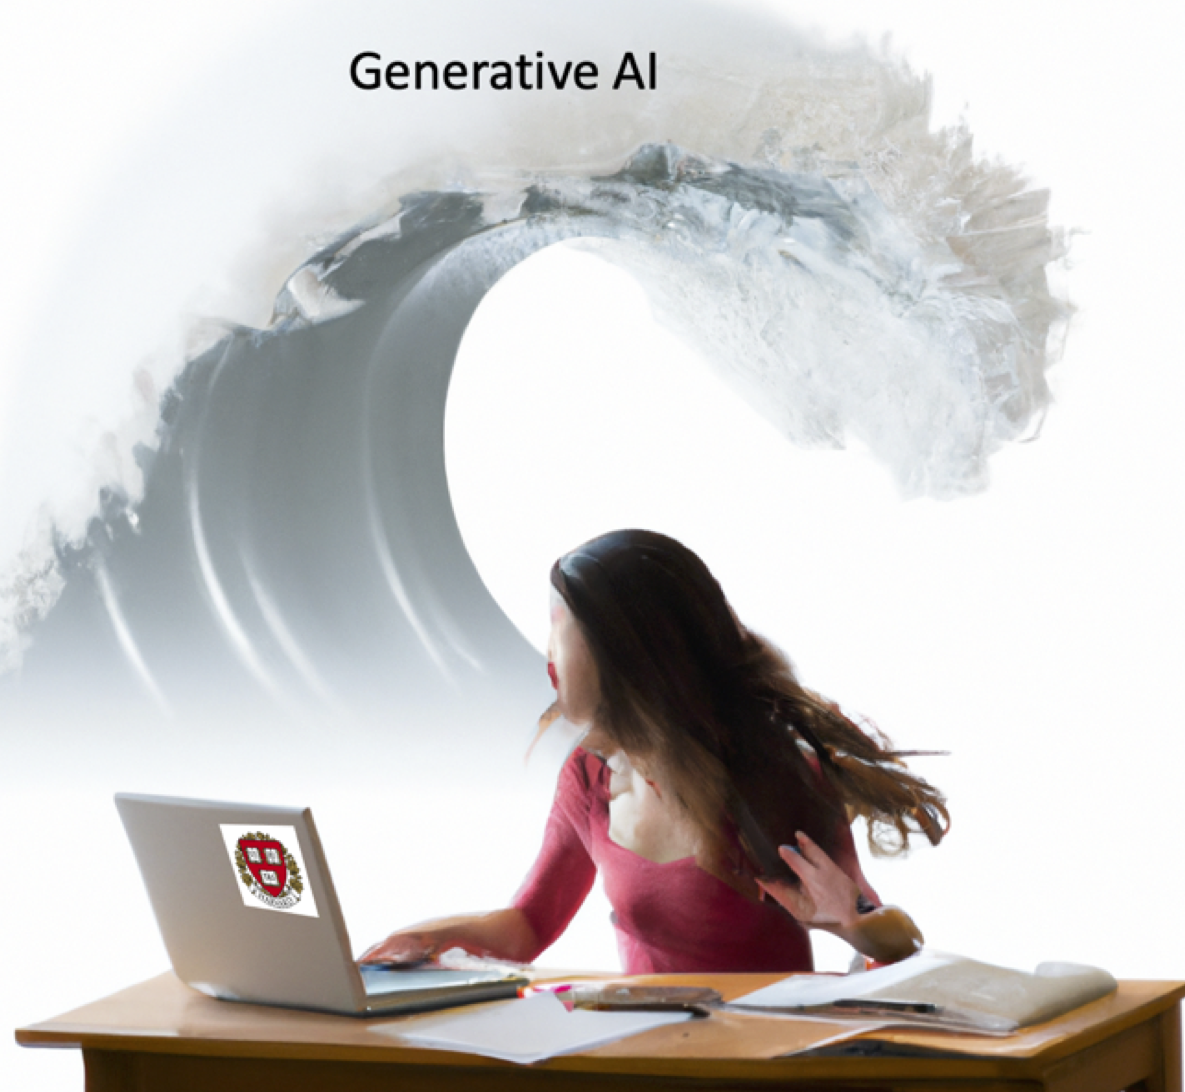 Woman at desk with laptop, abstract wave above labeled "Generative AI".